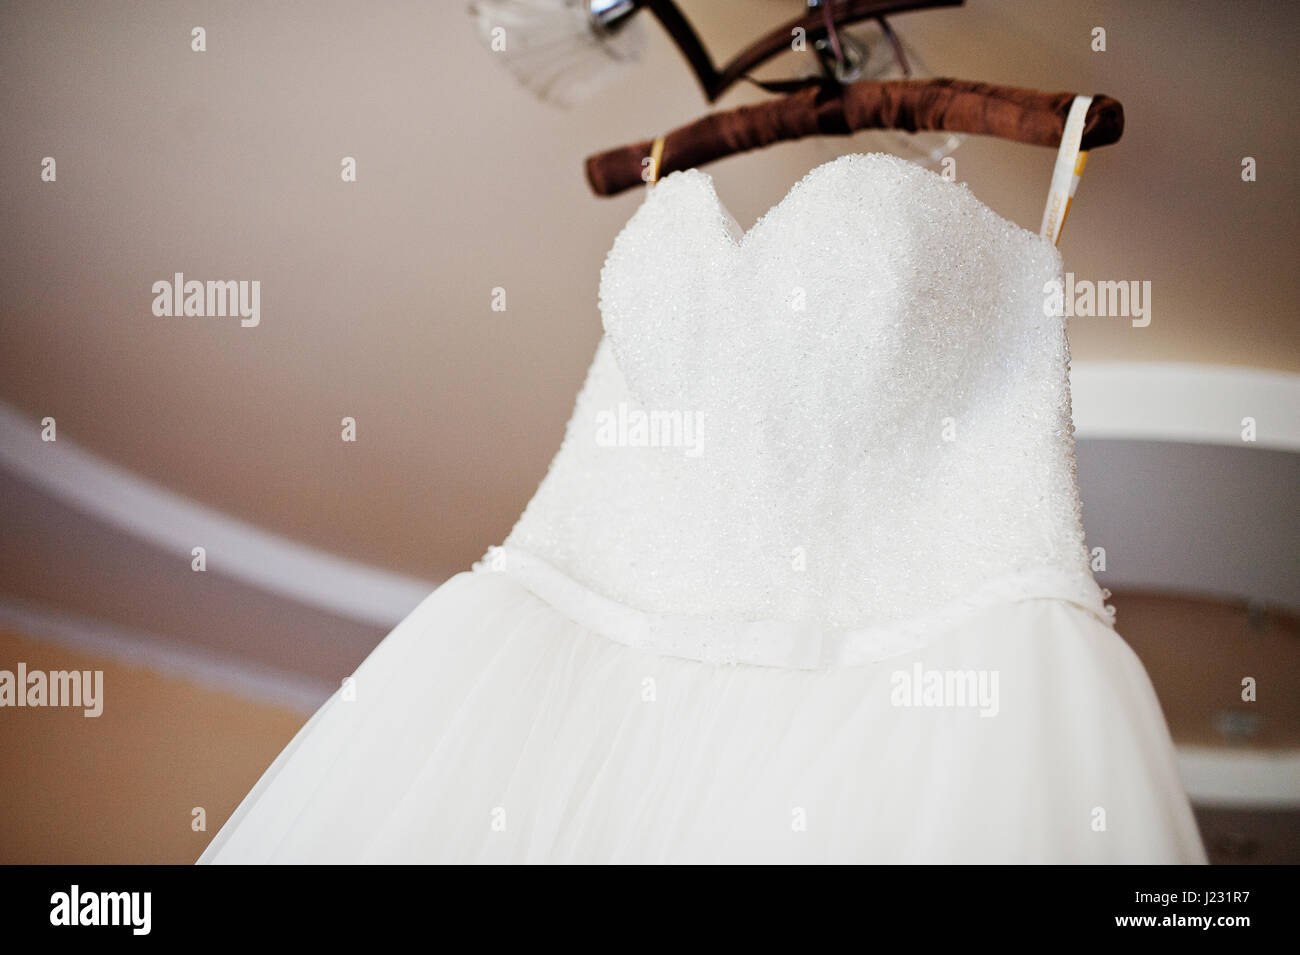 Wedding dress on hangers at ceilling. Stock Photo